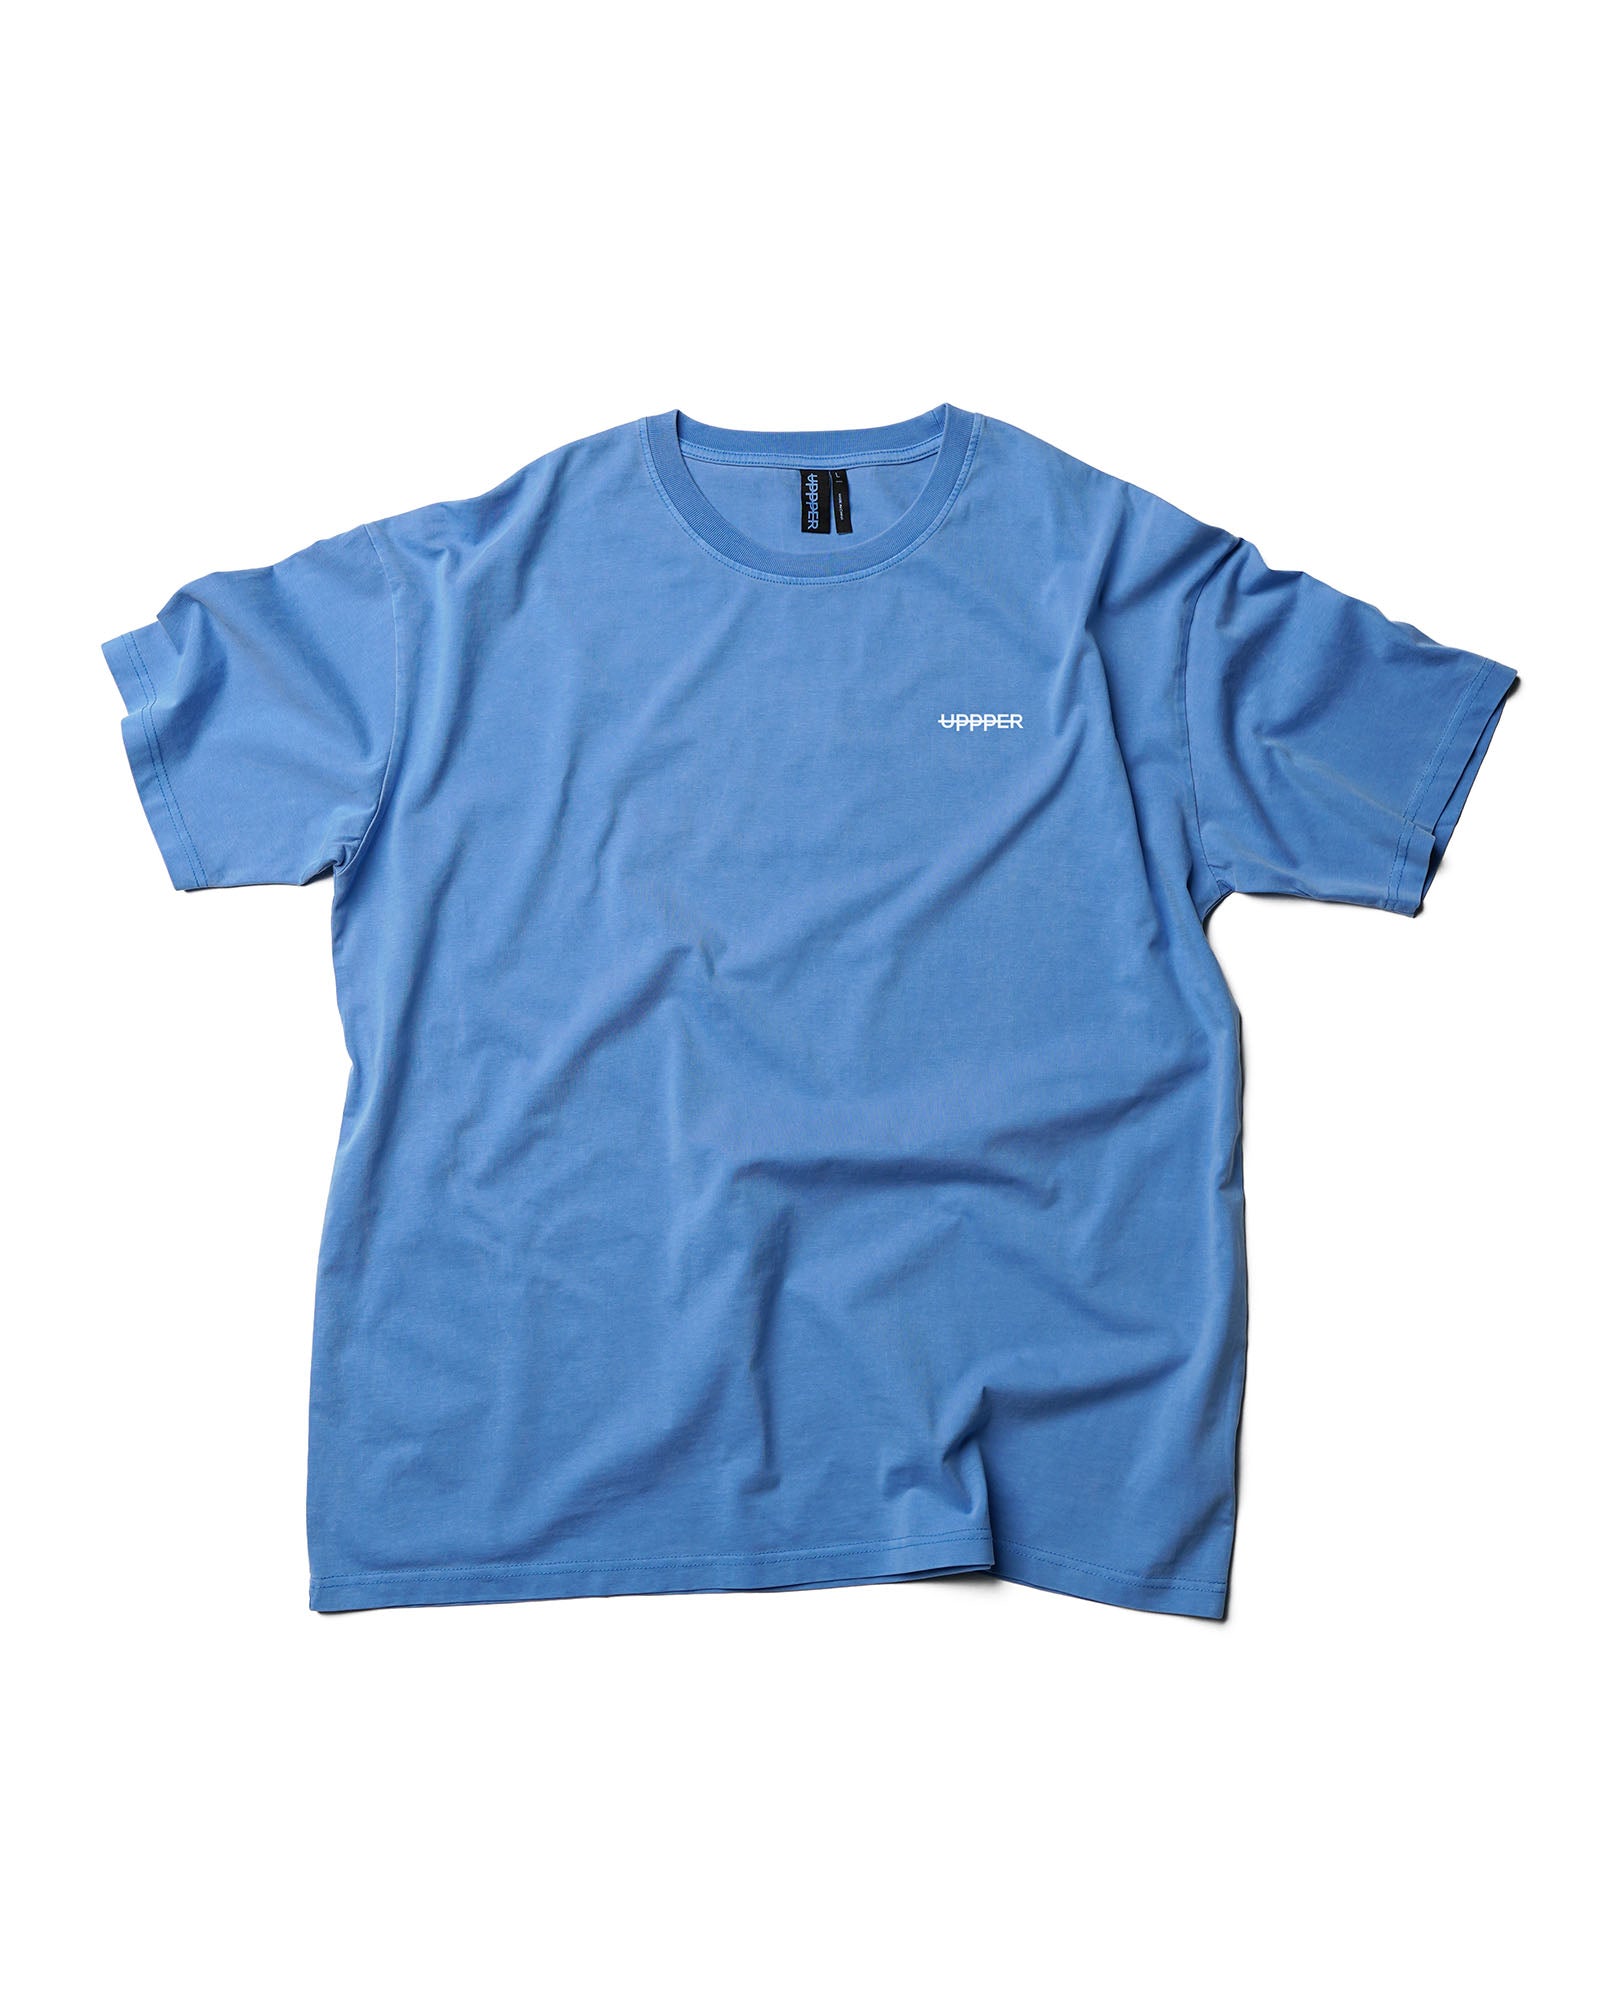 uppper t-shirt wsy blue (front)